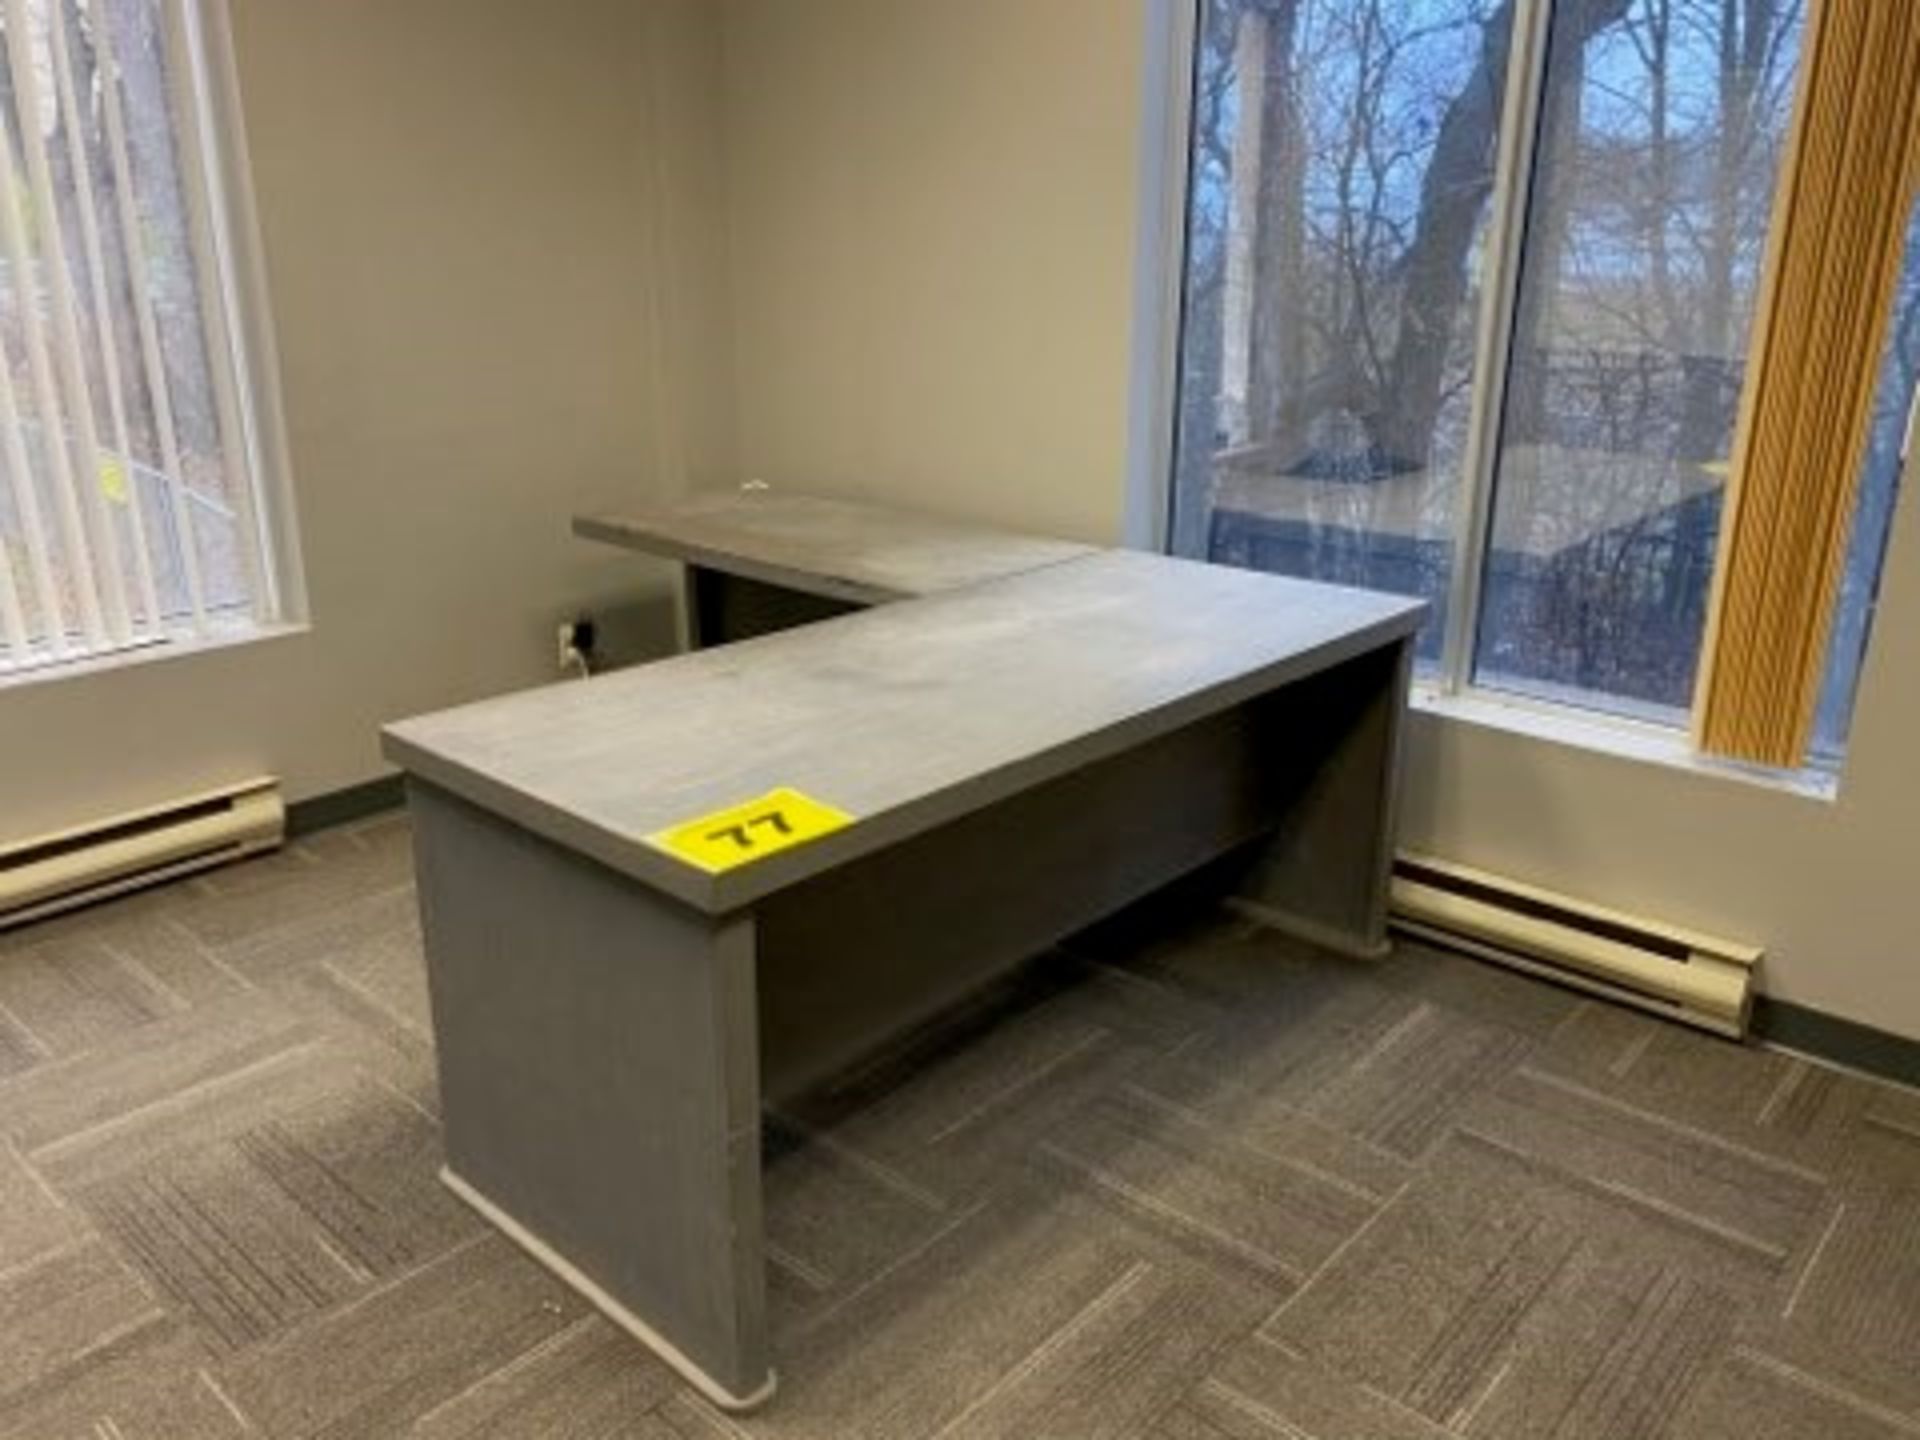 L-SHAPED, GRAY, WOOD OFFICE DESK WITH BOOKCASE